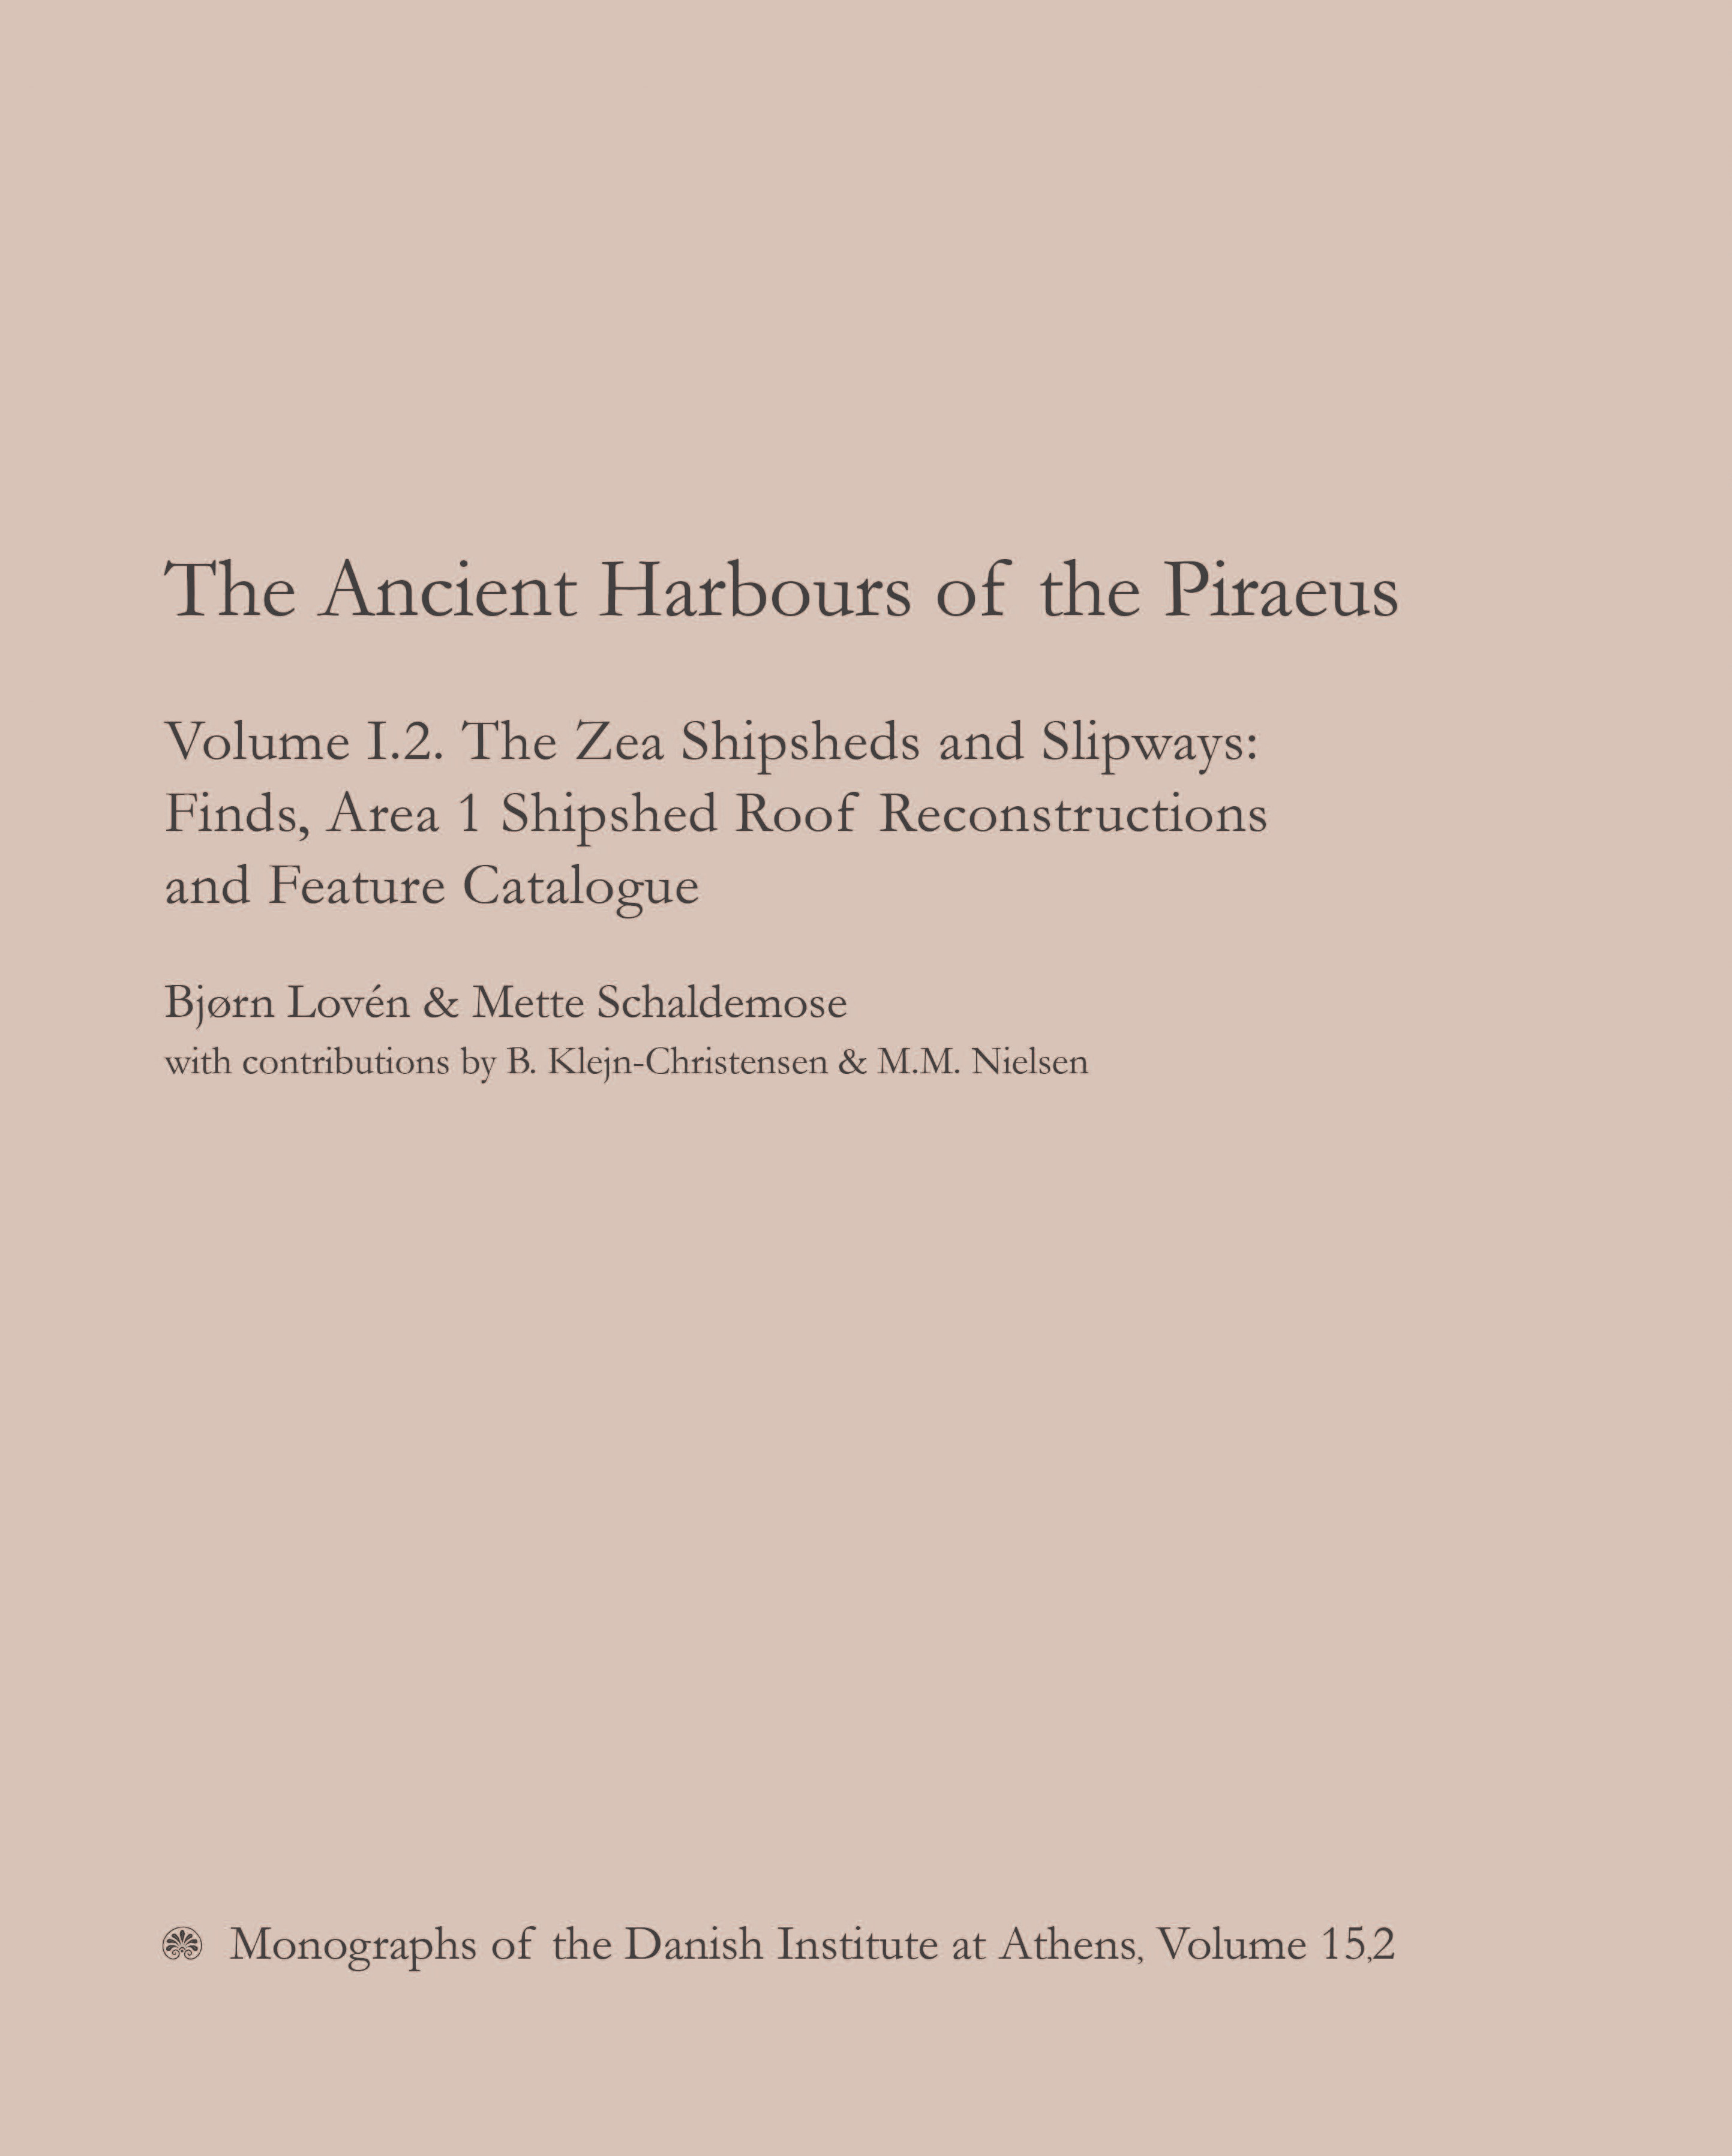 					View Vol. 15 No. 2 (2011): The Ancient Harbours of the Piraeus. Volume I.2. The Zea Shipsheds and Slipways: Finds, Area 1 Shipshed Roof Reconstructions and Feature Catalogue
				